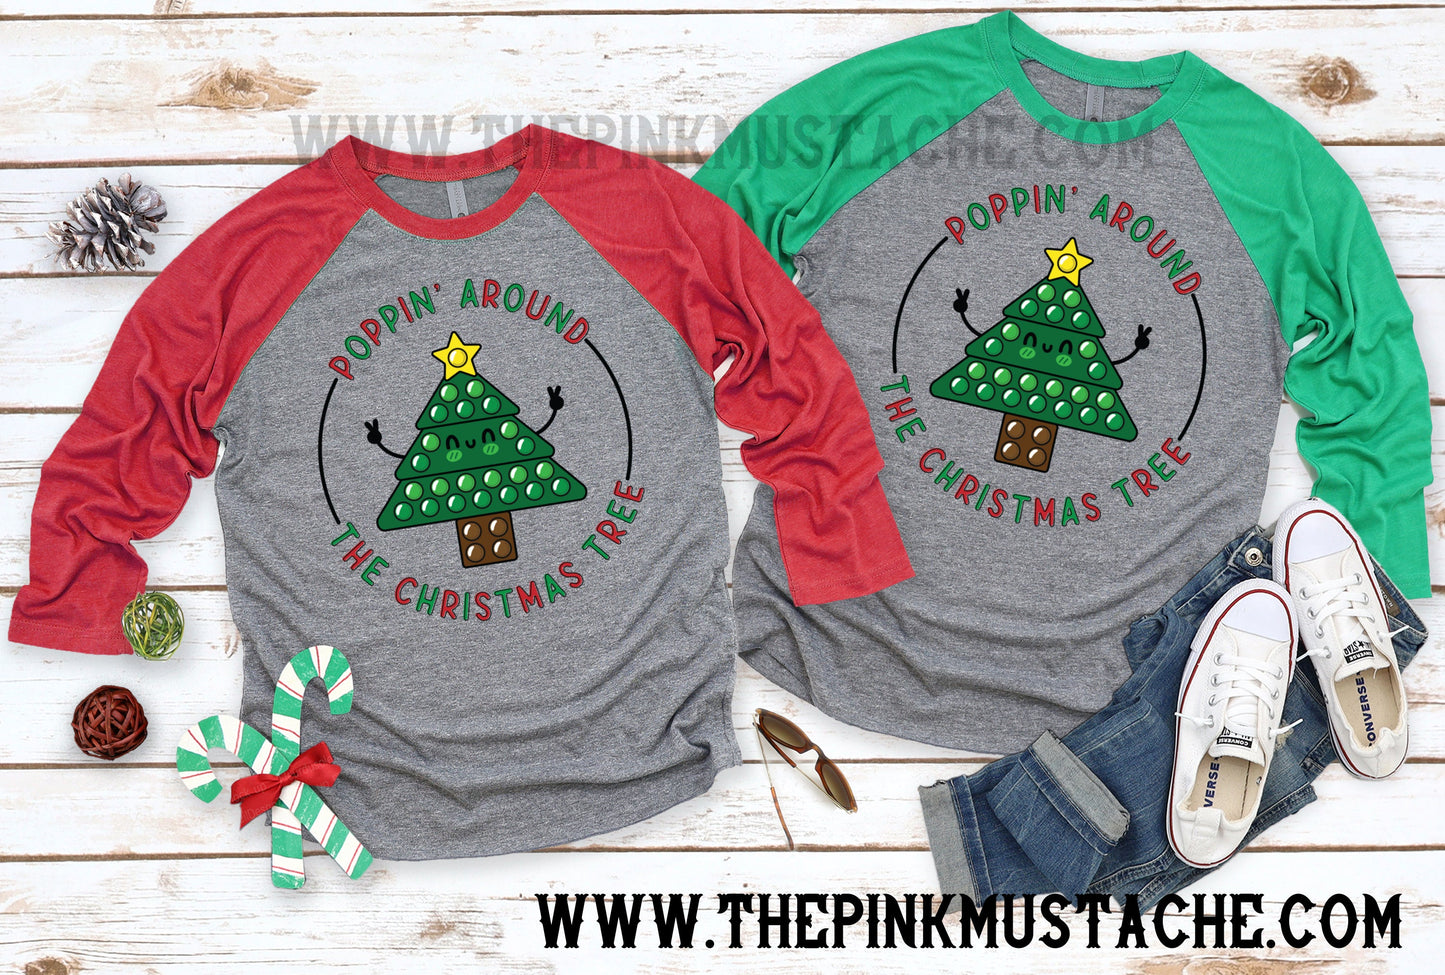 Poppin' Around The Christmas Tree Raglan/ Toddler, Youth, and Adult Sizes